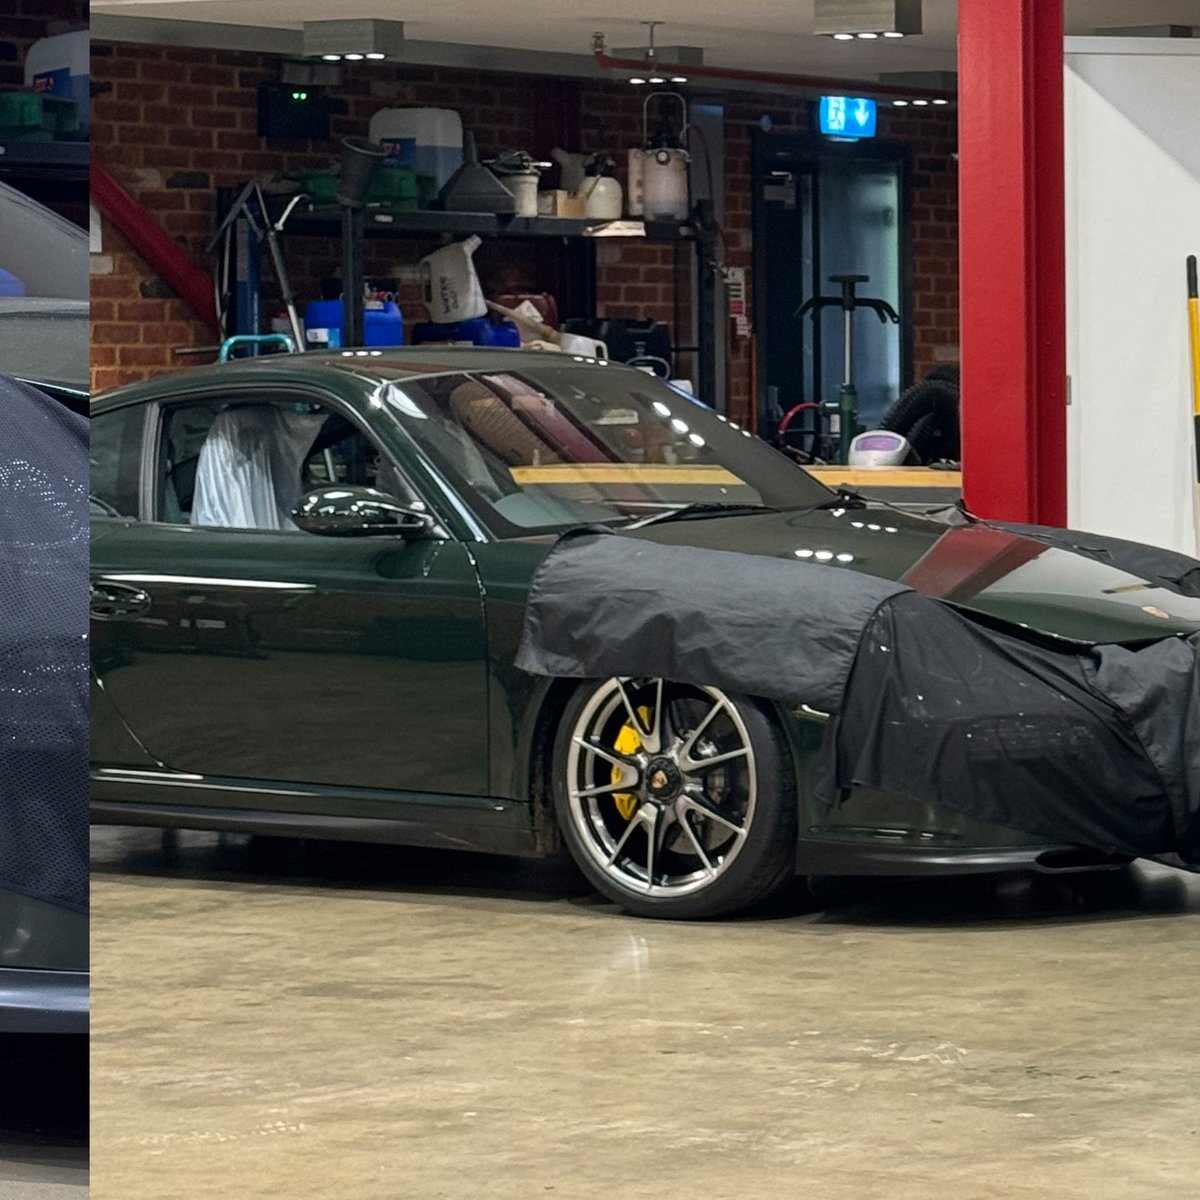 One of our fav' #signature builds is back with us for a few more #developments #video on this project build will happen soon so tell us what you'd like to know about this very special #gts #greenwithenvy  #makegreengreatagain #greenporsches